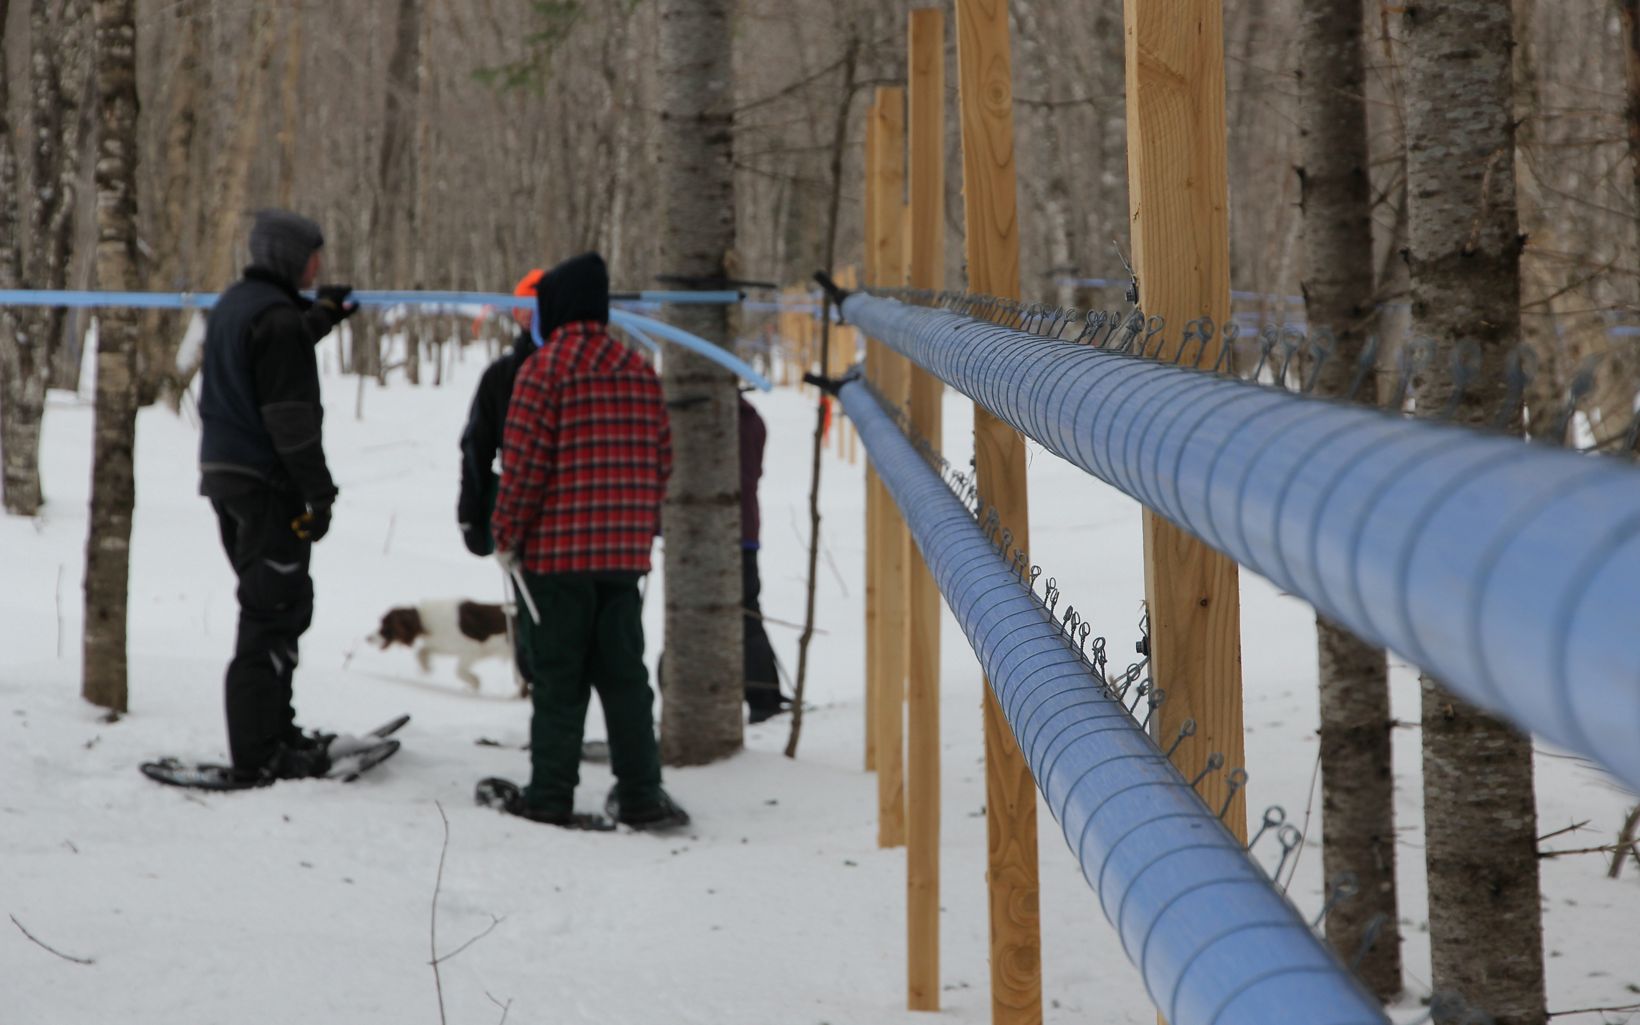 Three people in snowshoes stand in the snow chatting next to a fence bordering a sugarbush patch in the St. John River Forest.